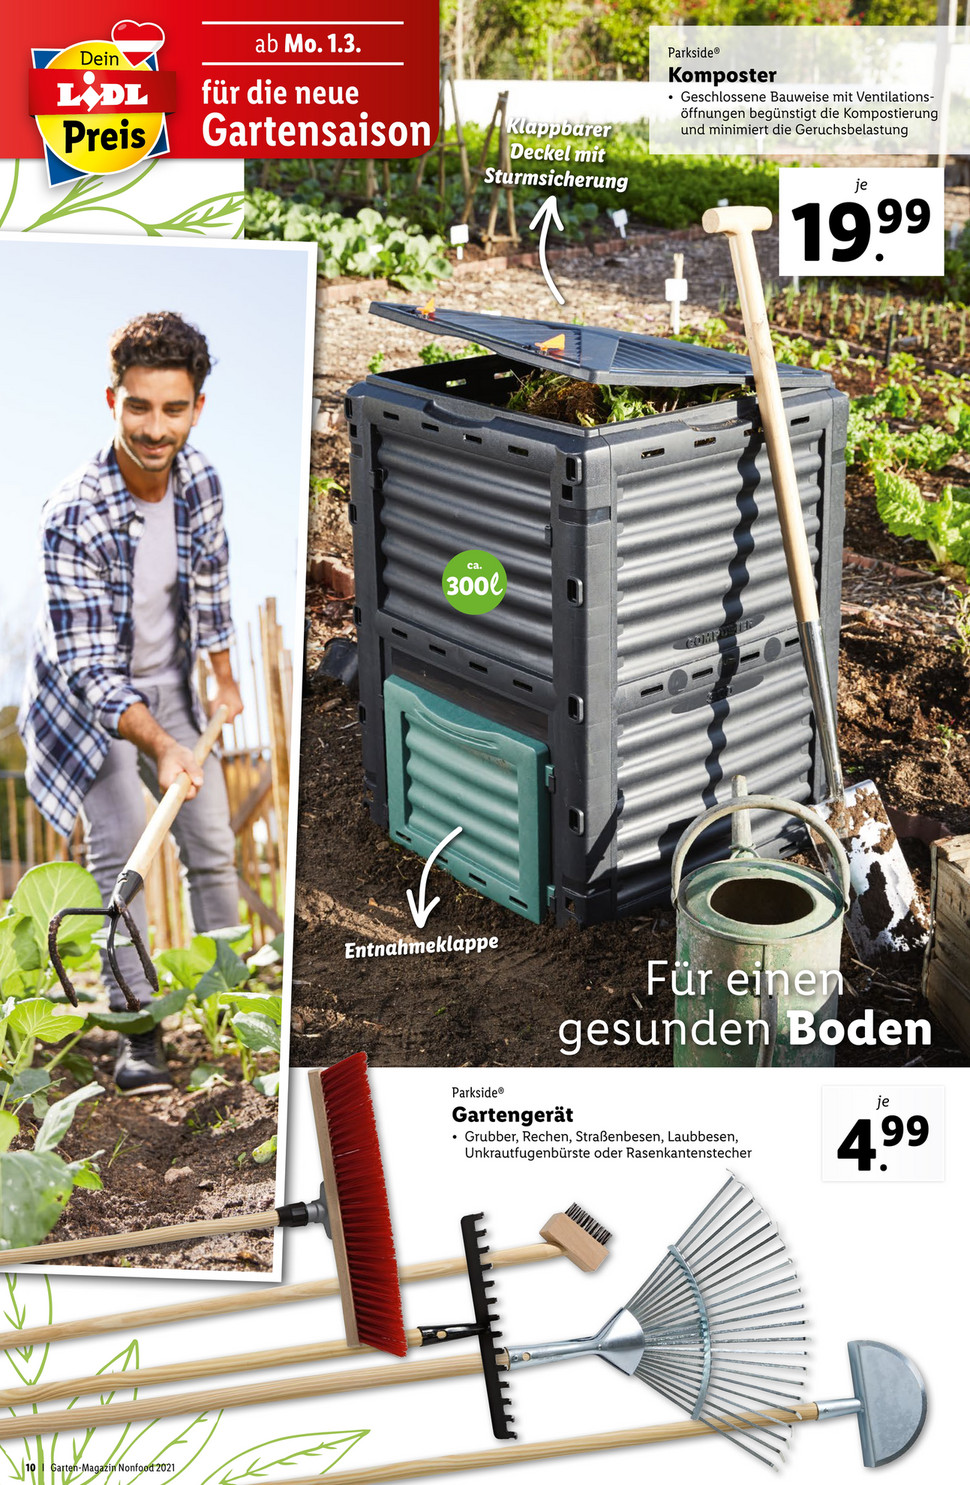 My publications lidl0225g with - Created 10-11 Seite - 